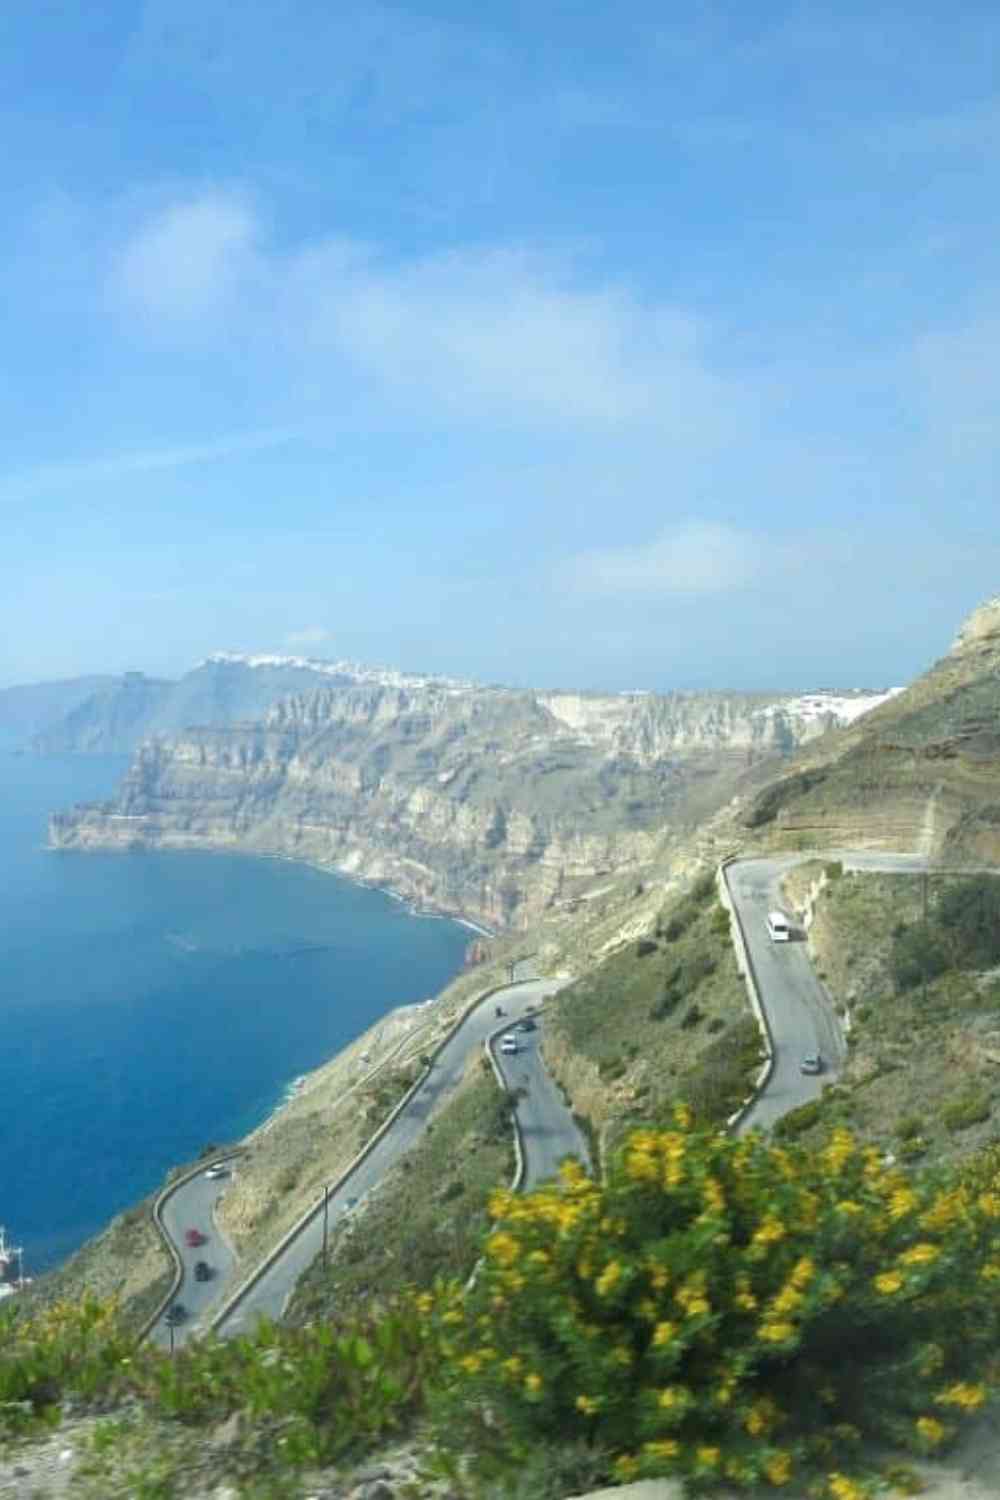 The sea and mountains and windy roads in Greece